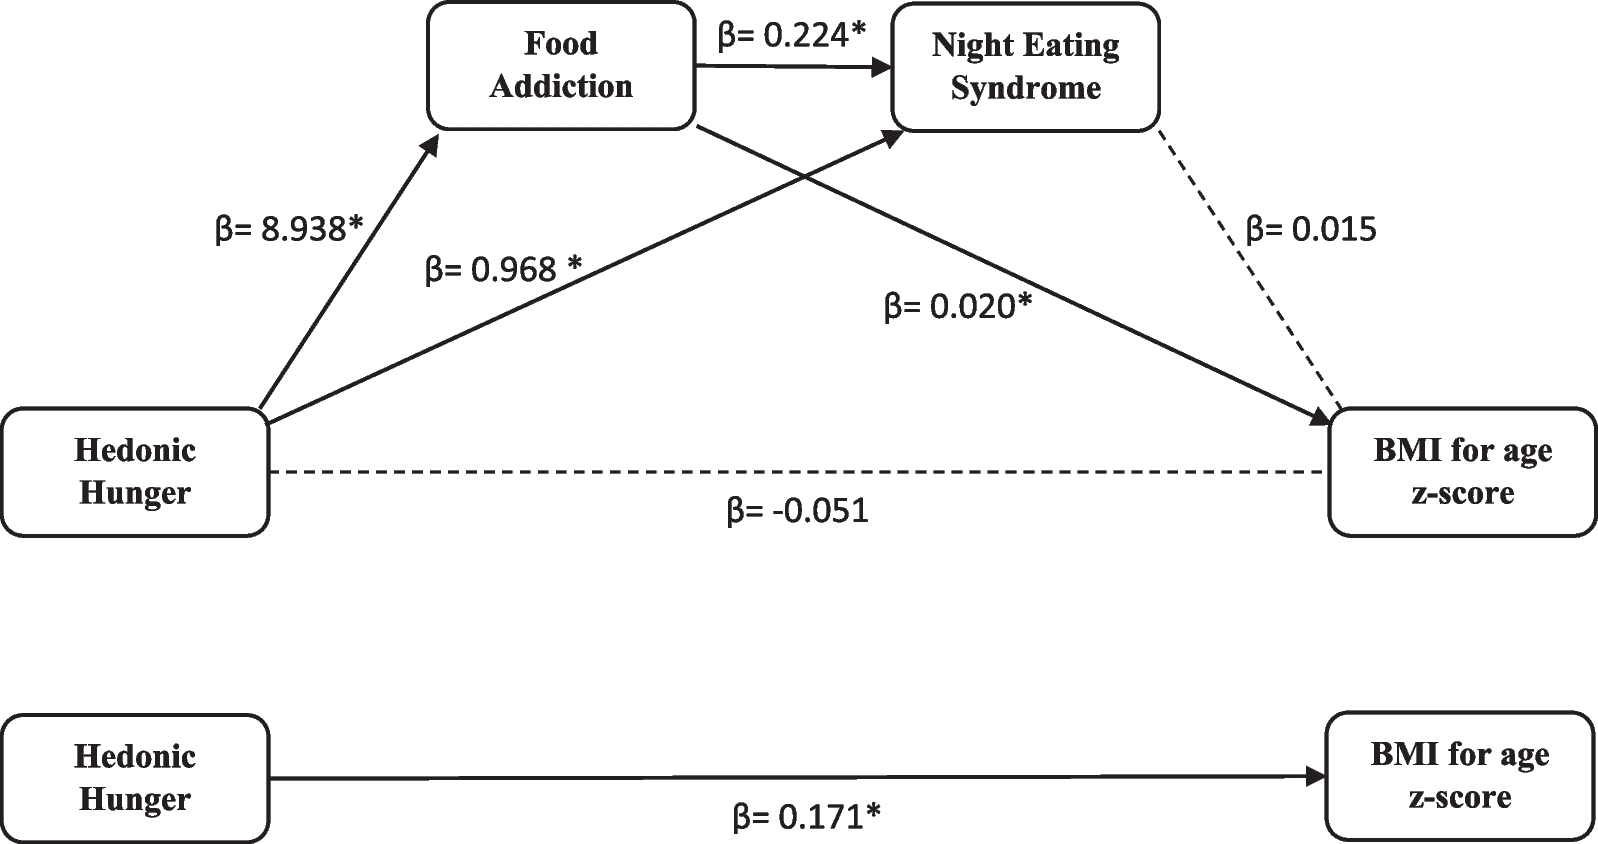 Hedonic hunger, food addiction, and night eating syndrome triangle in adolescents and ıts relationship with body mass ındex